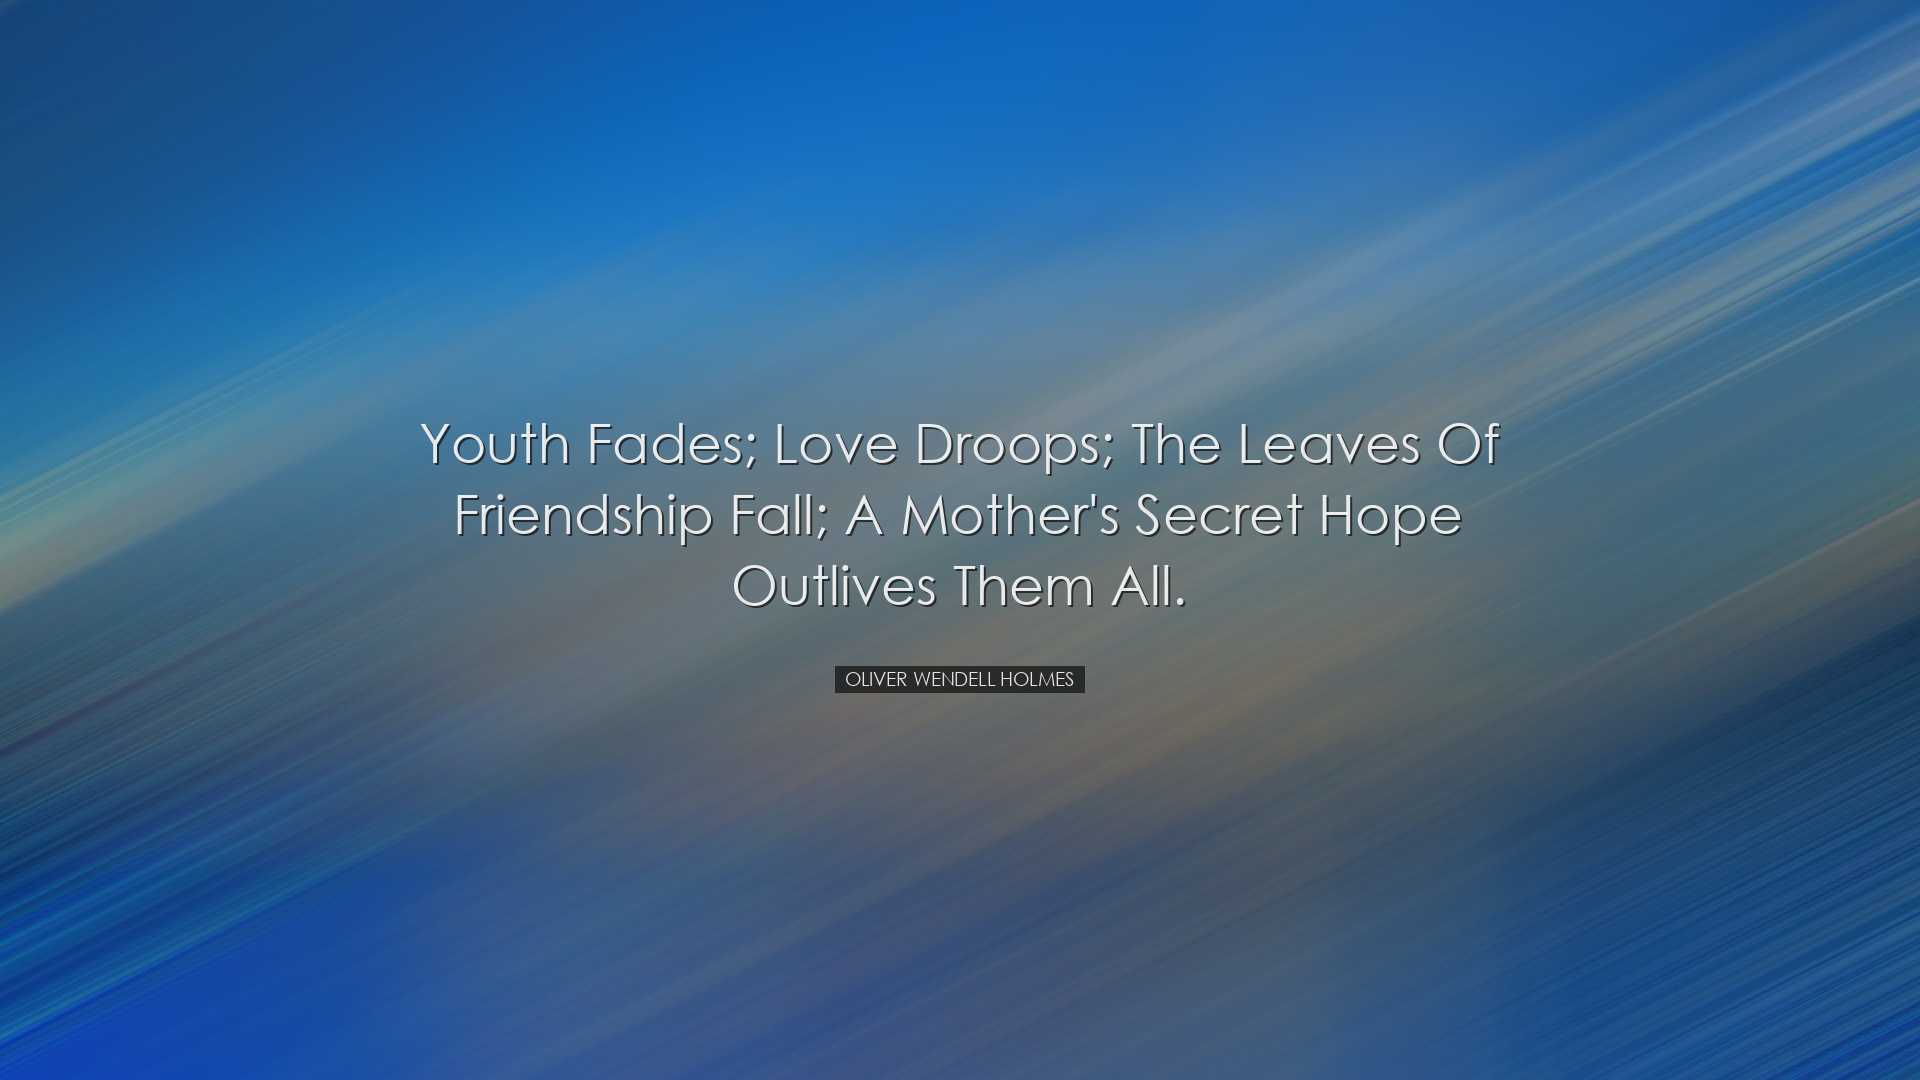 Youth fades; love droops; the leaves of friendship fall; A mother'